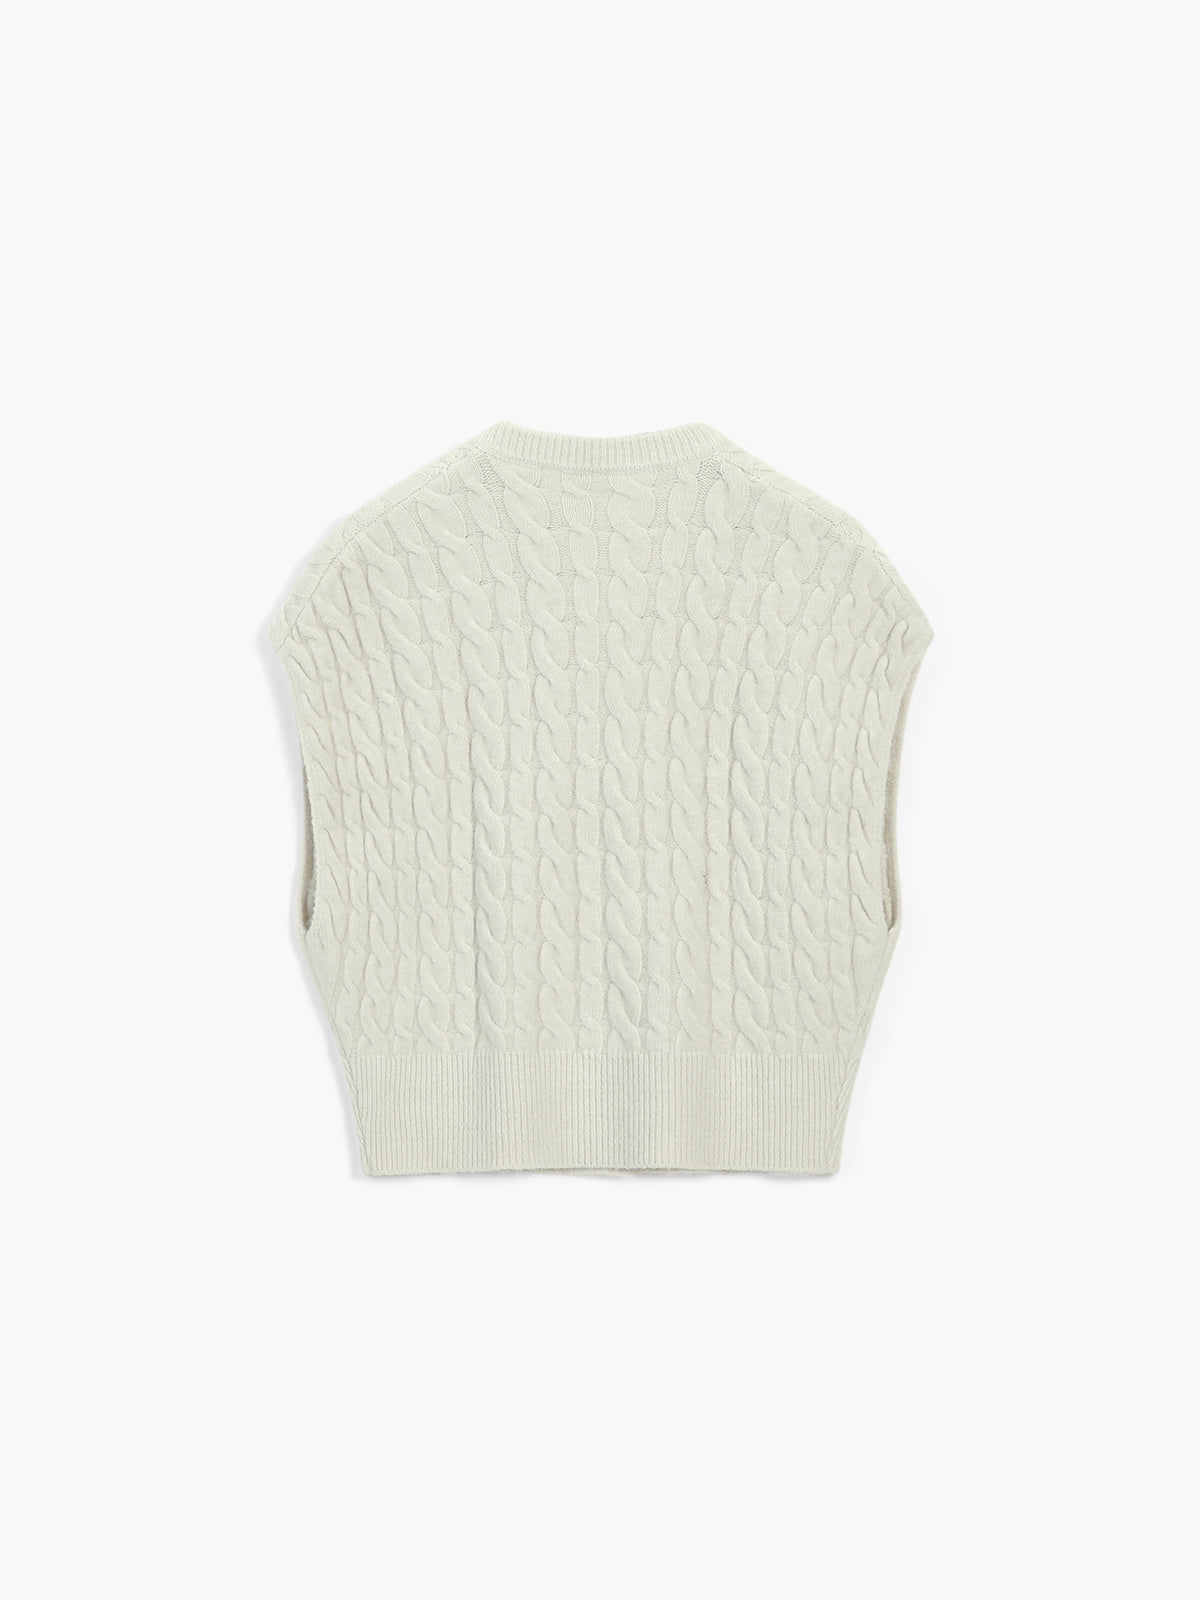 Utility Cable Knit Sweater Vest